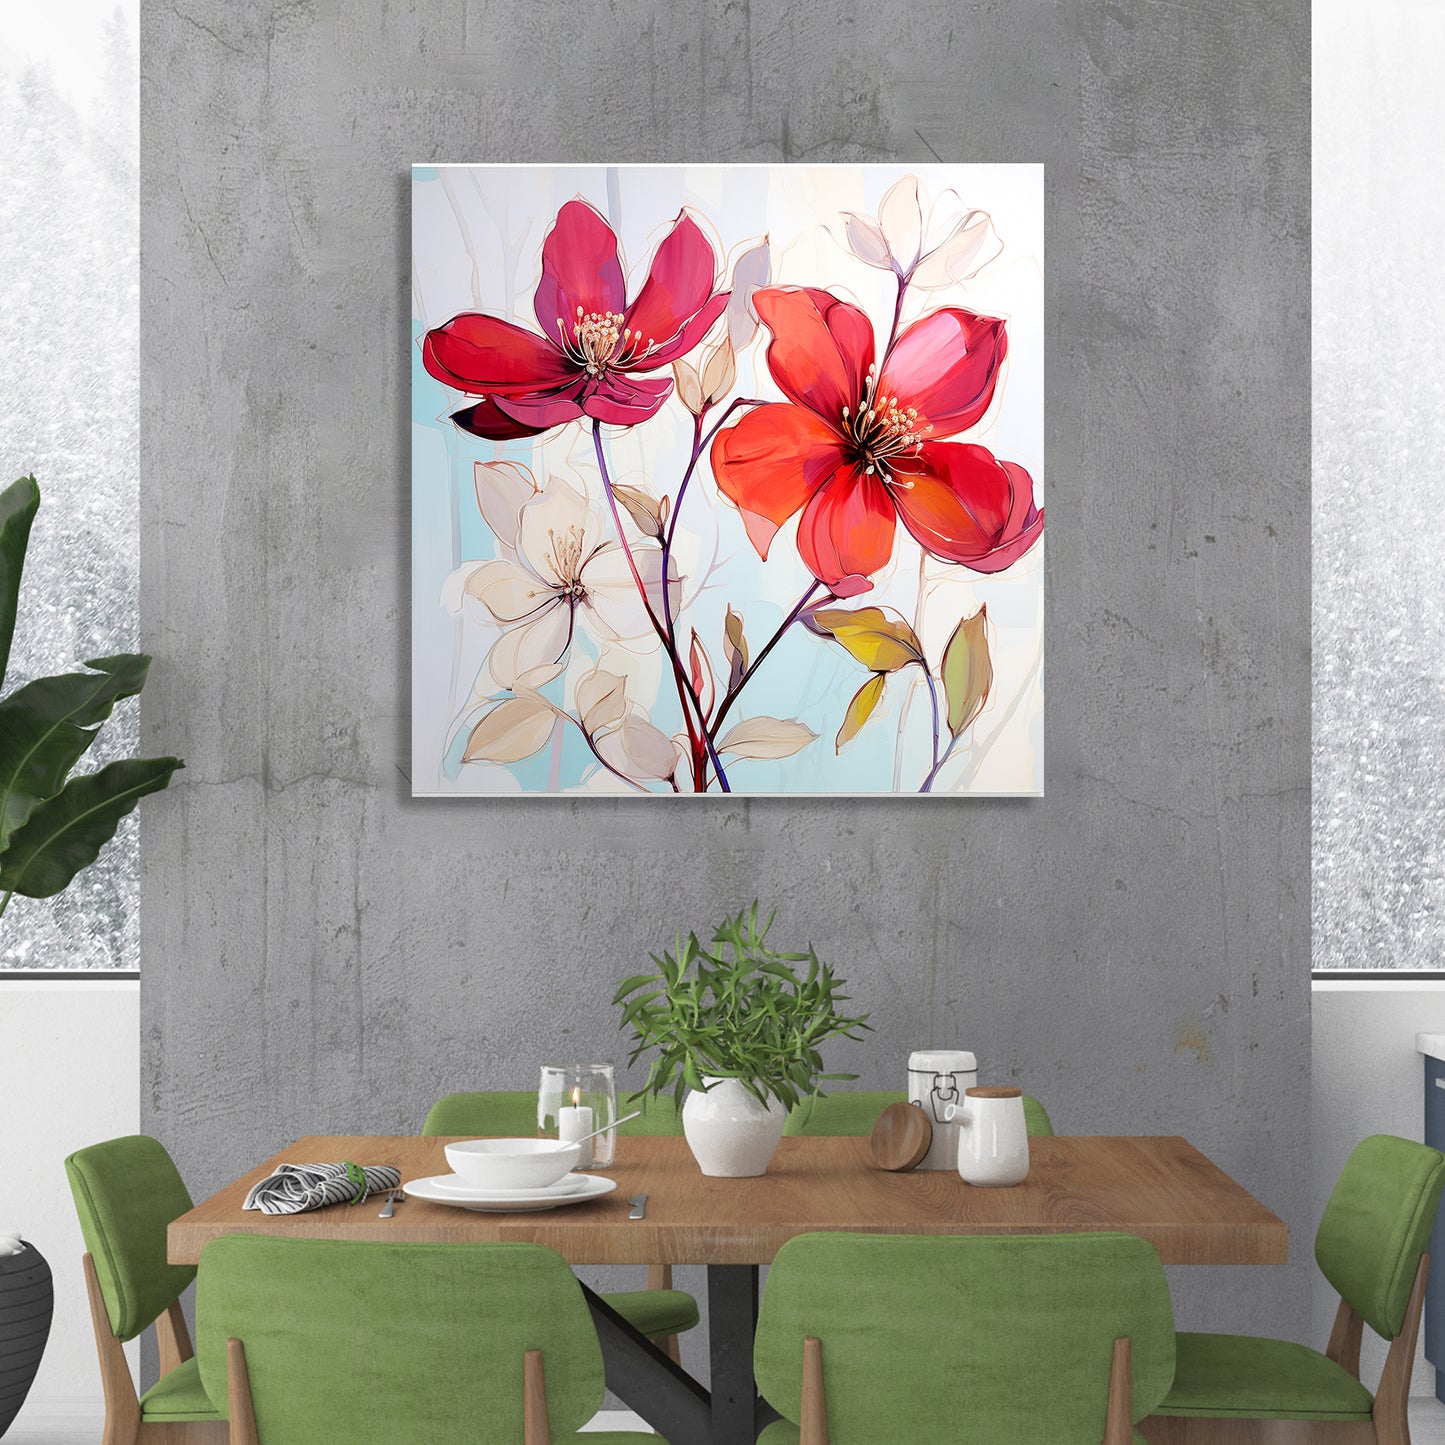 Vibrant Red Floral Canvas Painting for Living Room Bedroom Home and Office Wall Decor